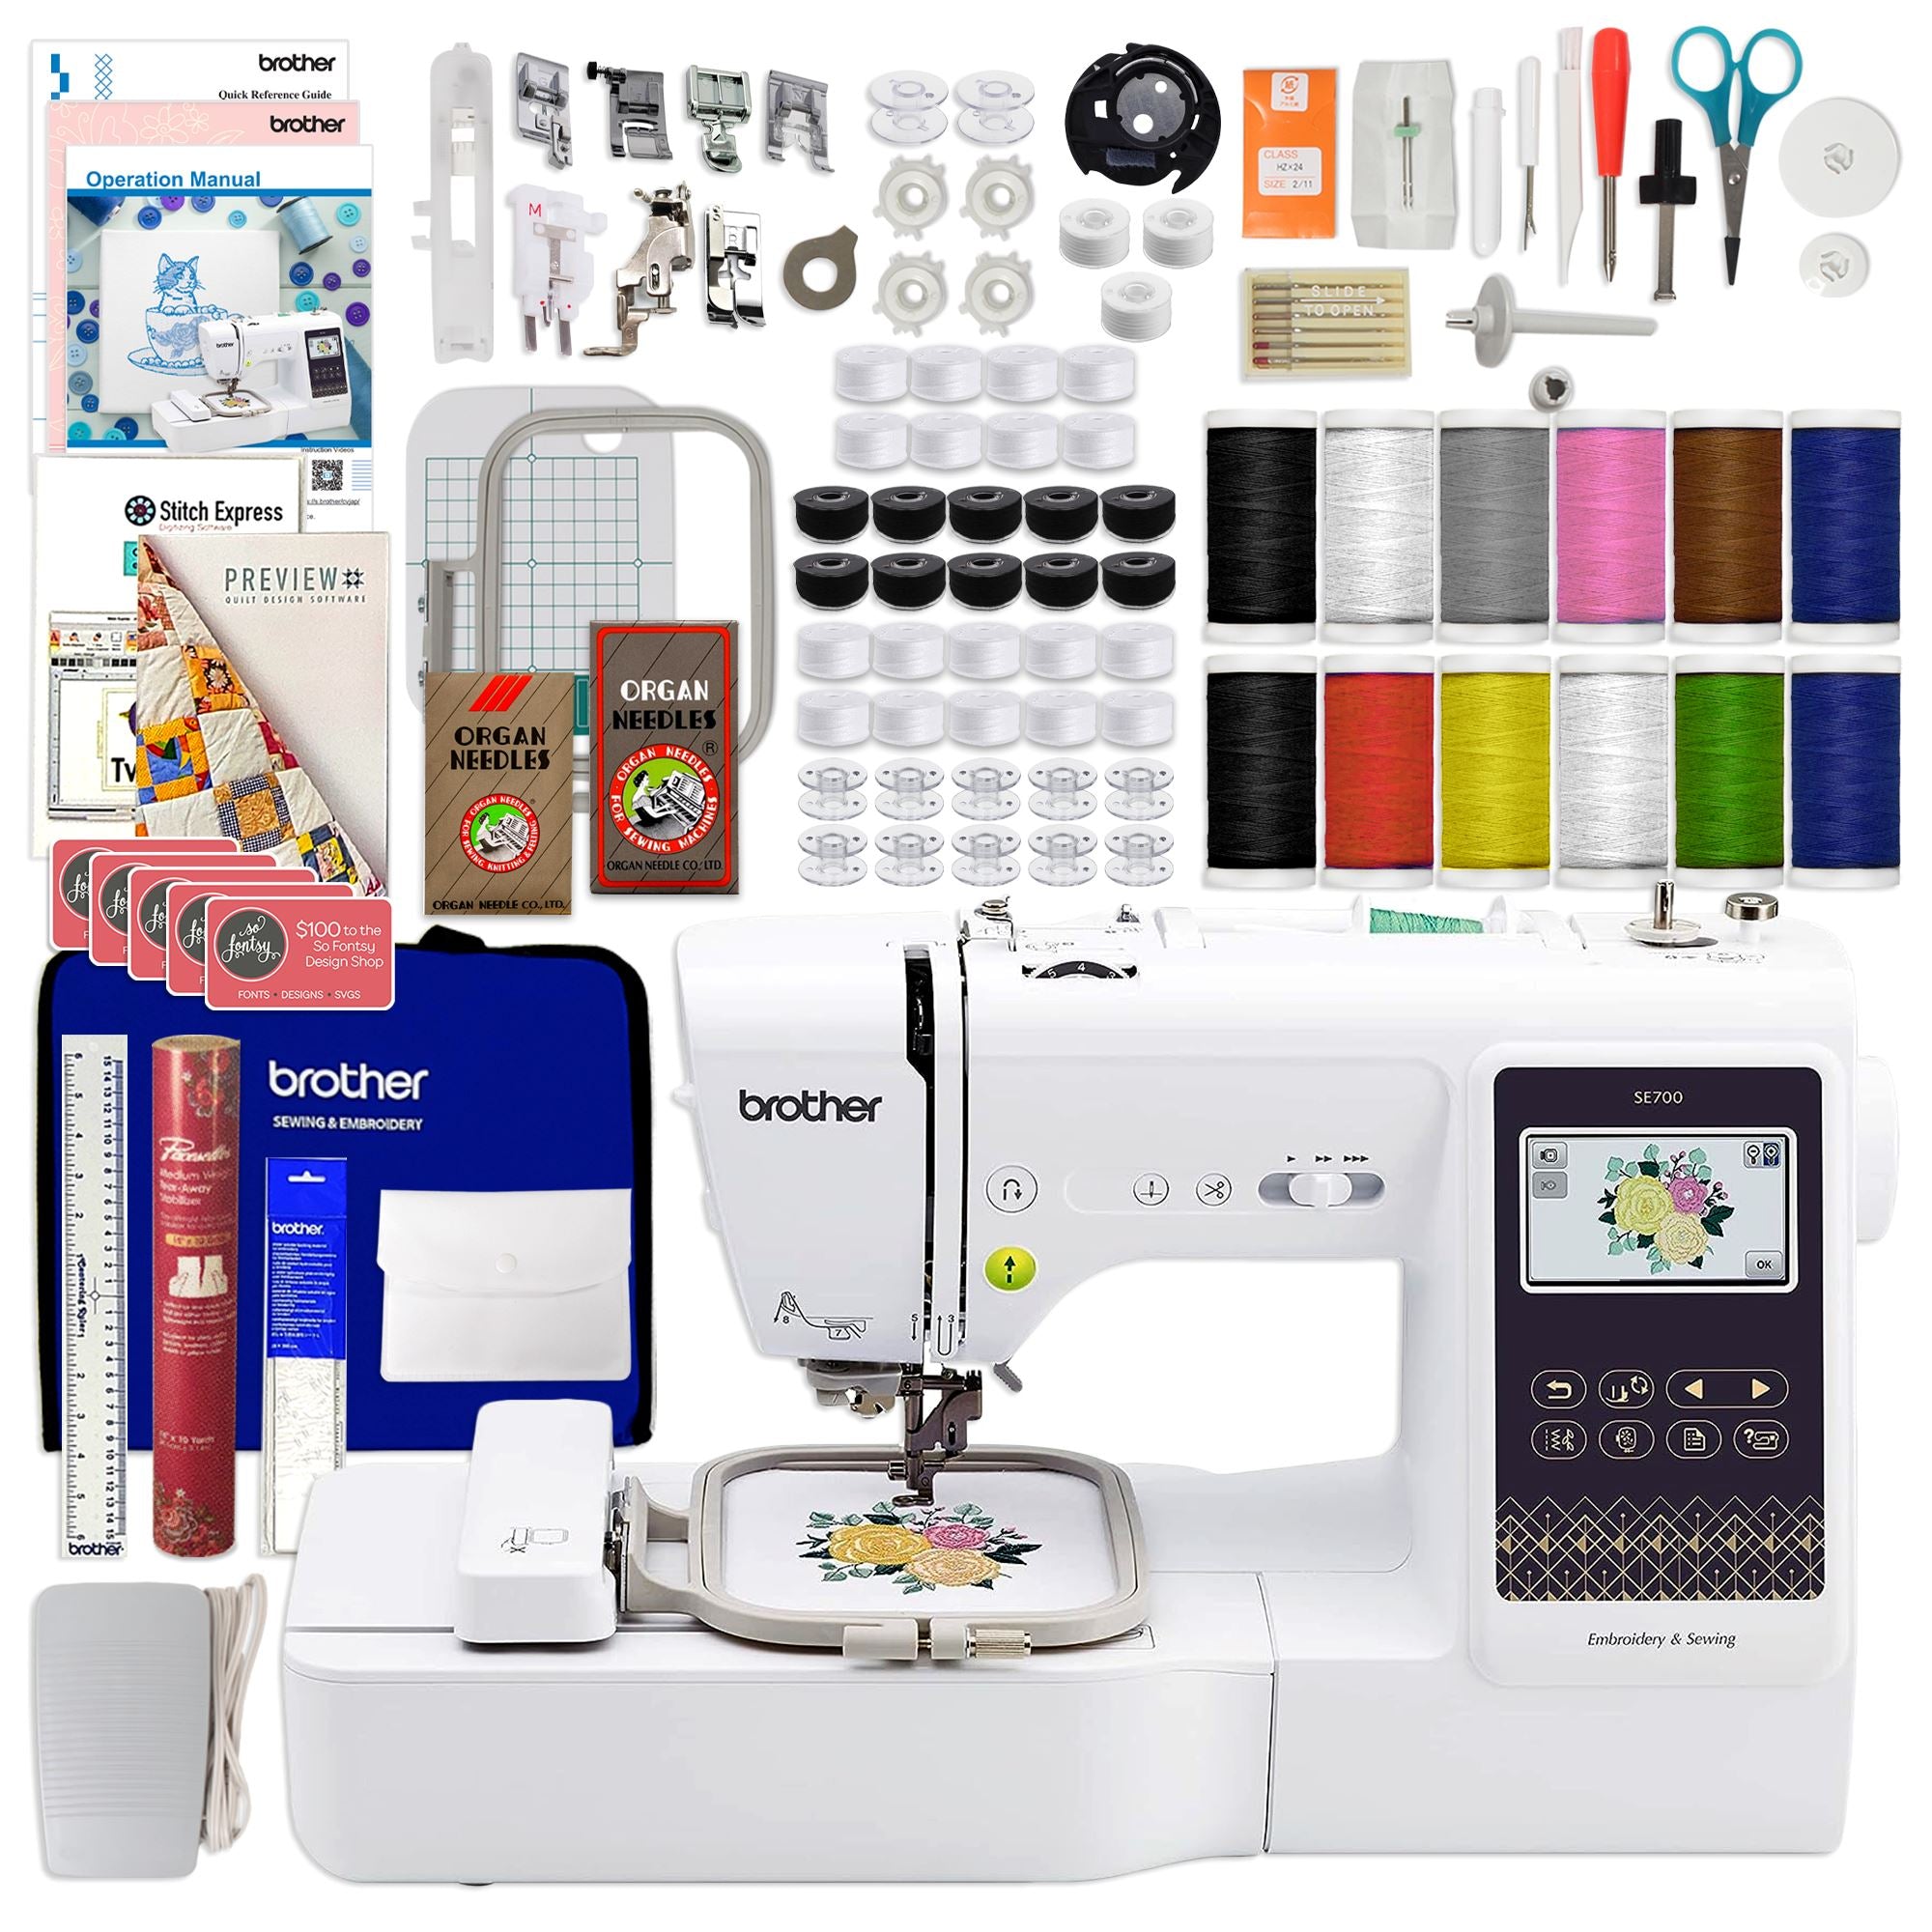 Get A Wholesale portable sewing machine kit For Your Business 